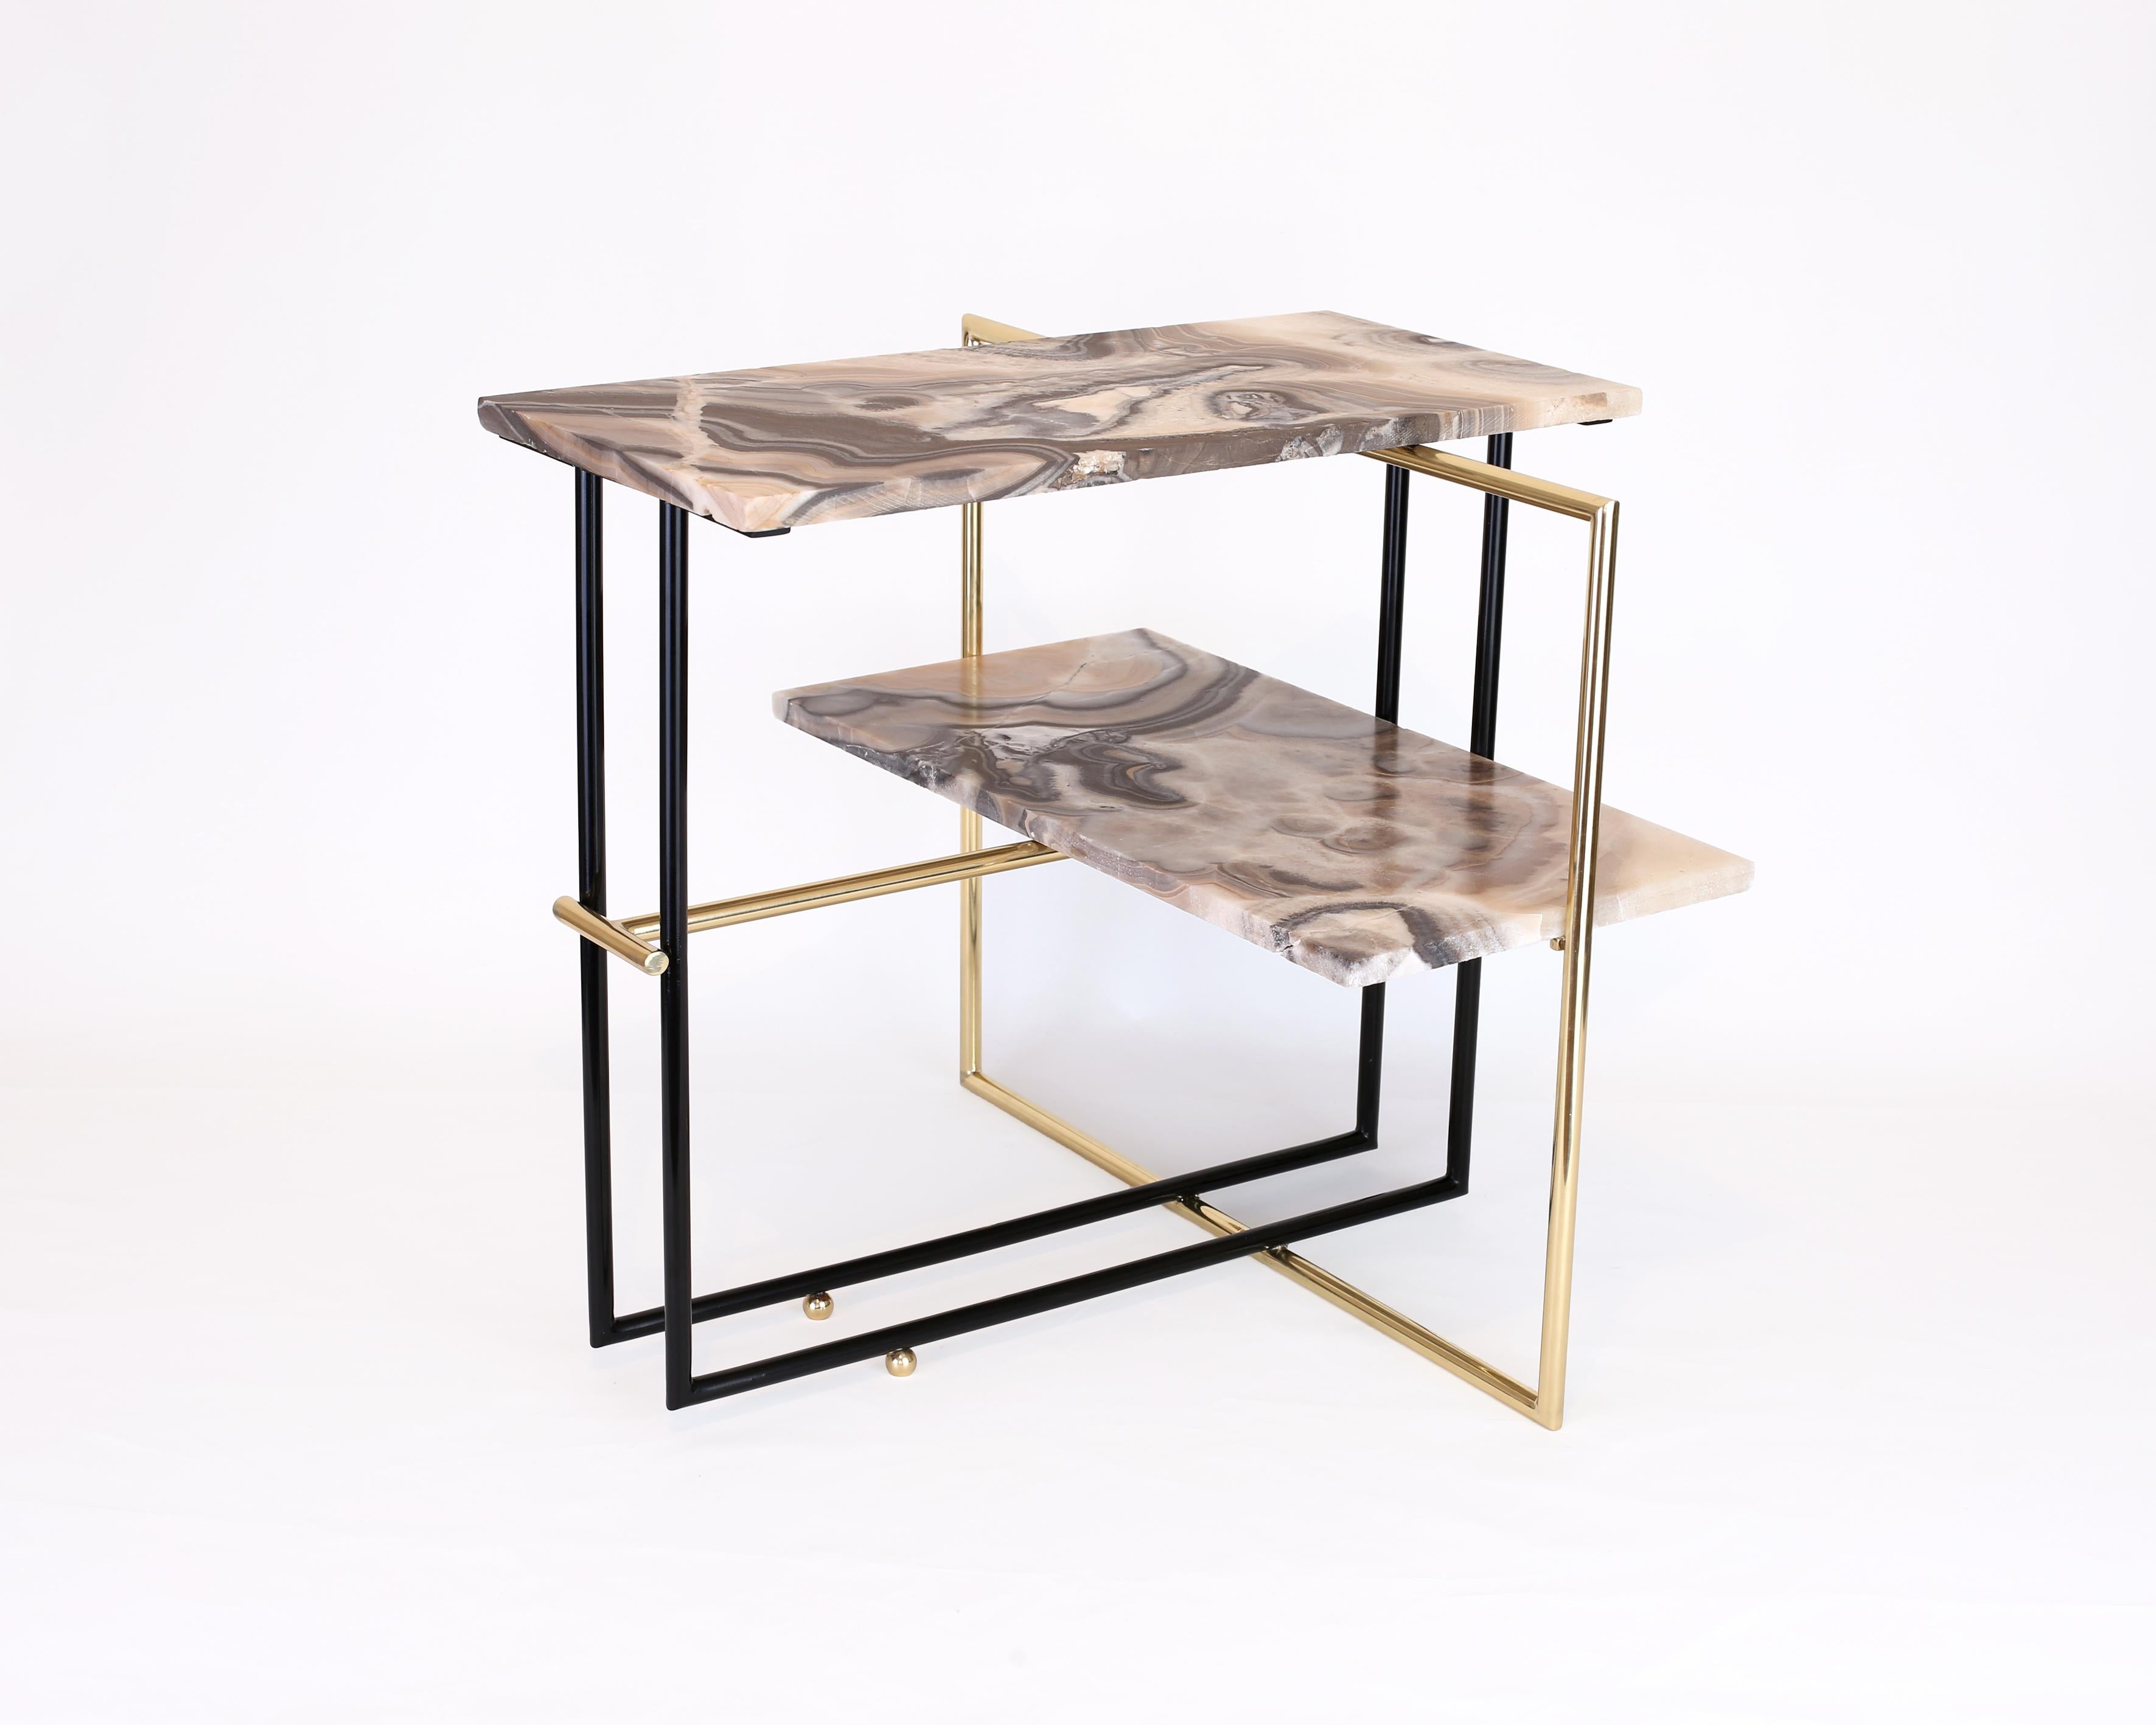 Uña side table by Nomade Atelier
Dimensions: D72 x W60 x H65 cm
Material: stone, Onyx
Weight: 20 kg

The UÑA table is fable, mythology and design blended together. The striking contrast between the stone’s solid weight and the apparent frailty